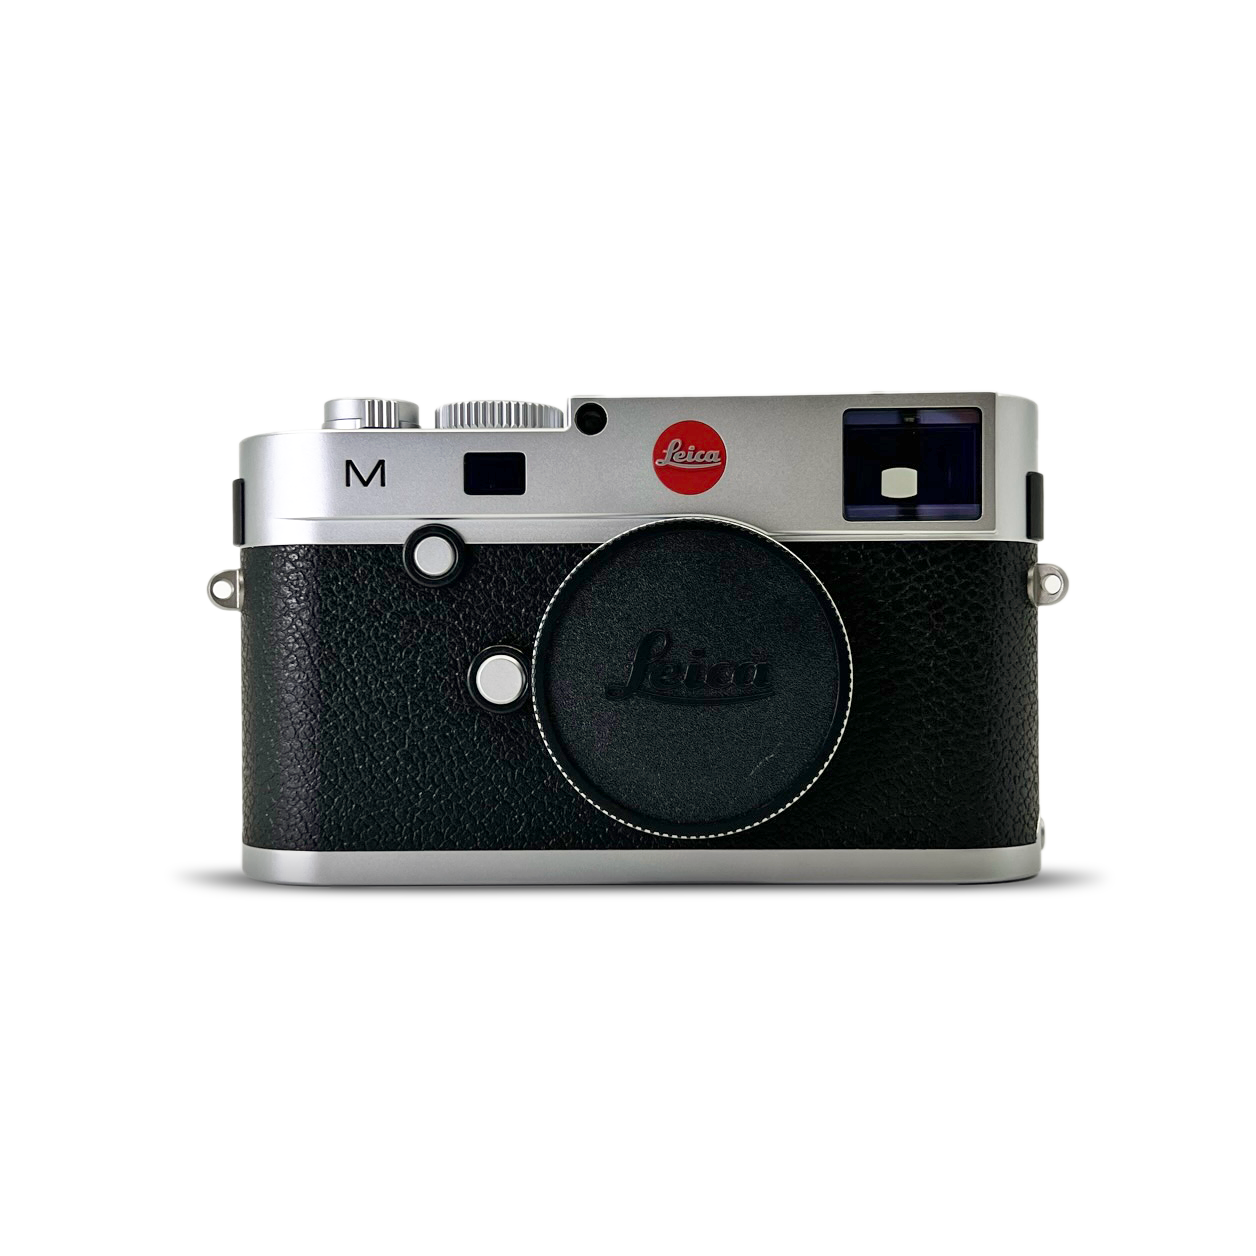 Leica 24 Megapixel Mirrorless Camera Body Only, Silver - image 1 of 4